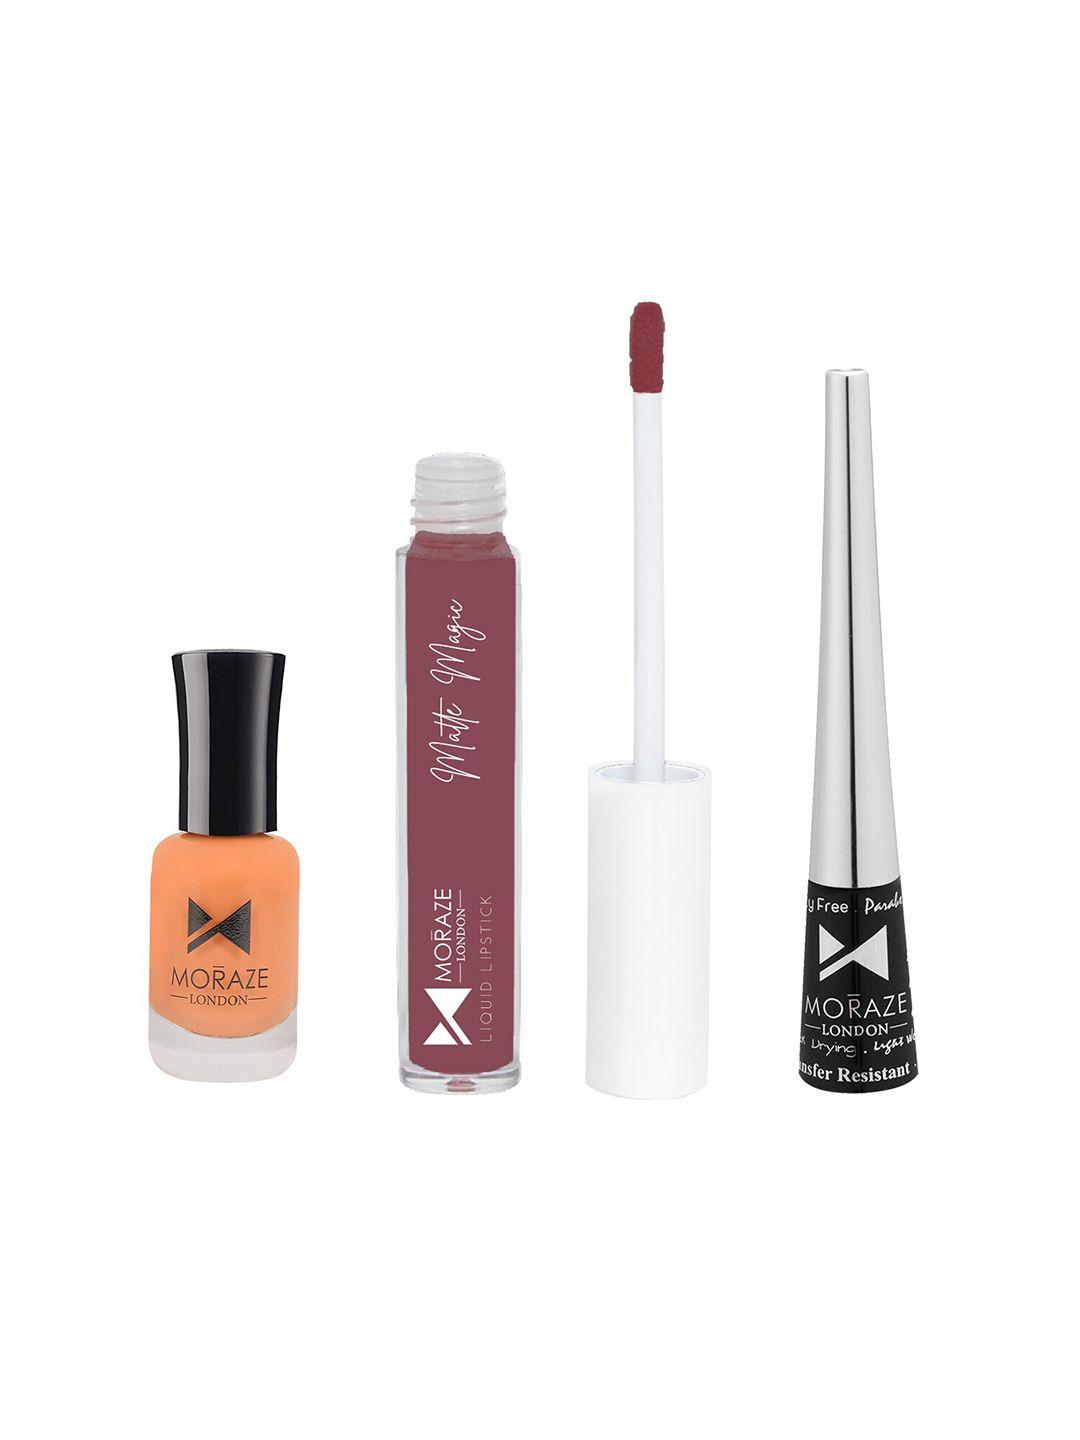 moraze pack of 1 nude nail polish (autumn) with 1 lipstick (shades of love) and 1 eyeliner